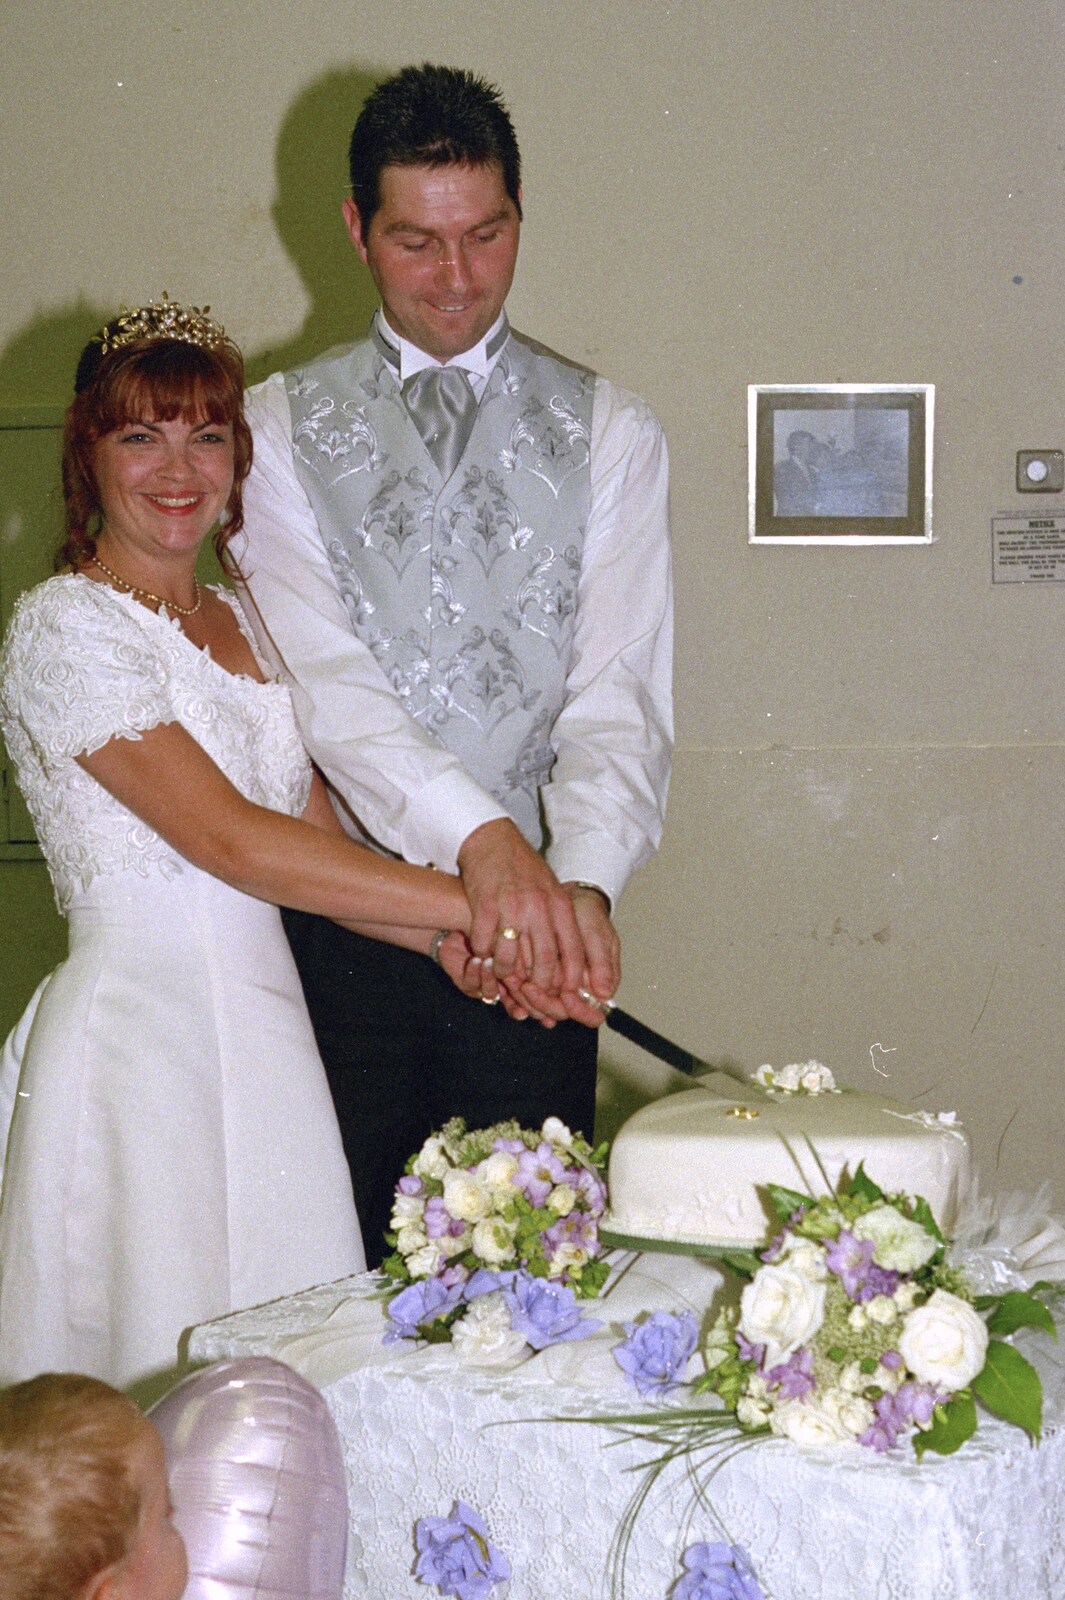 Michelle and Sean cut the cake from Sean and Michelle's Wedding, Bashley FC, New Milton - 12th August 2000